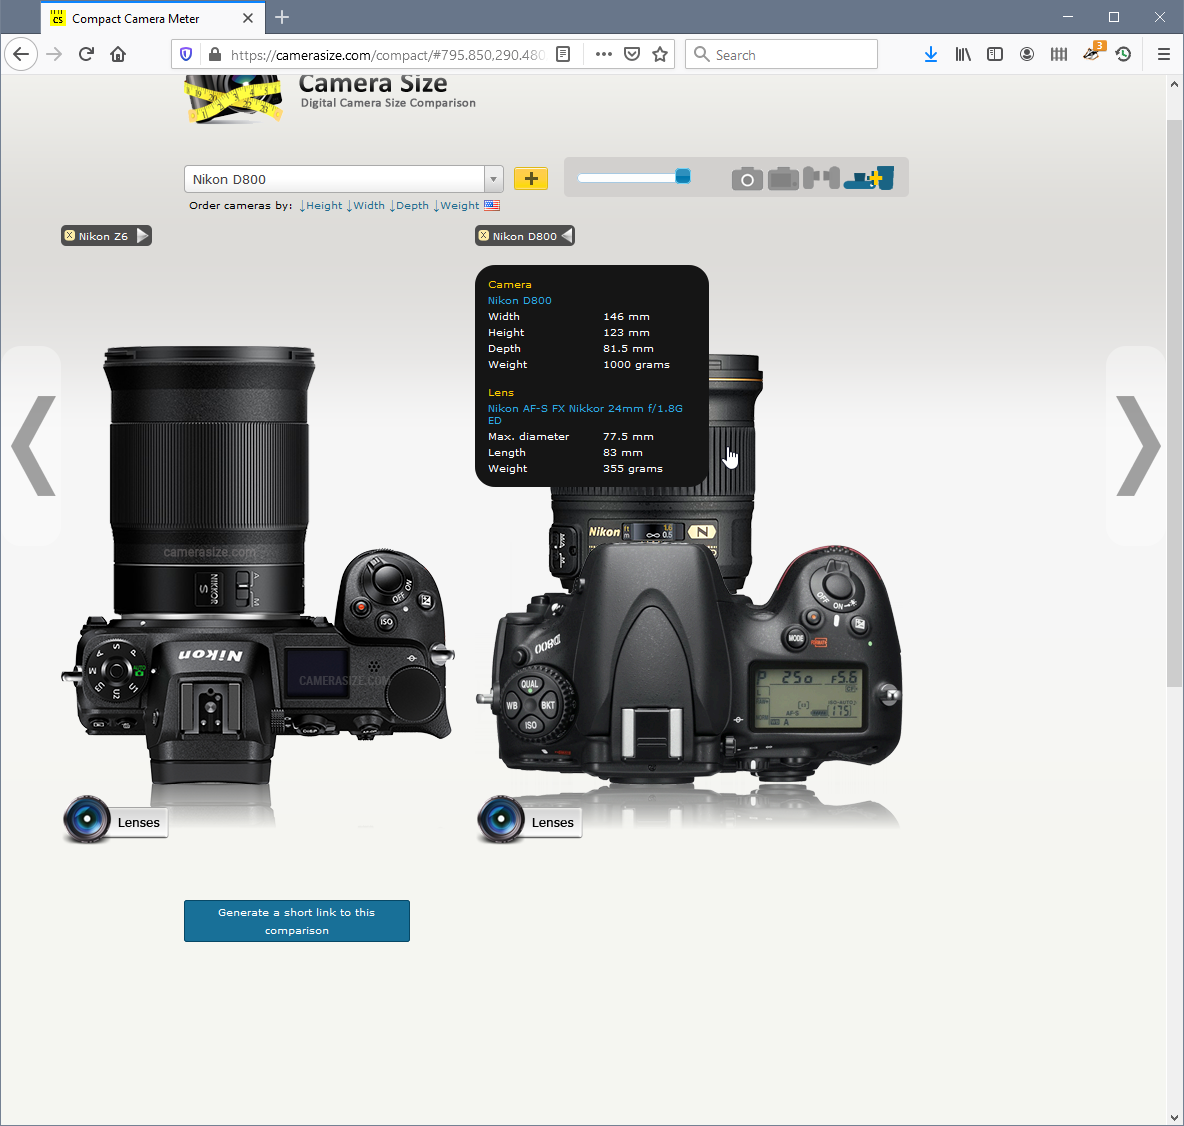 Compact-Camera-Meter-Mozilla-Firefox-2020-04-27-14-01-37.png